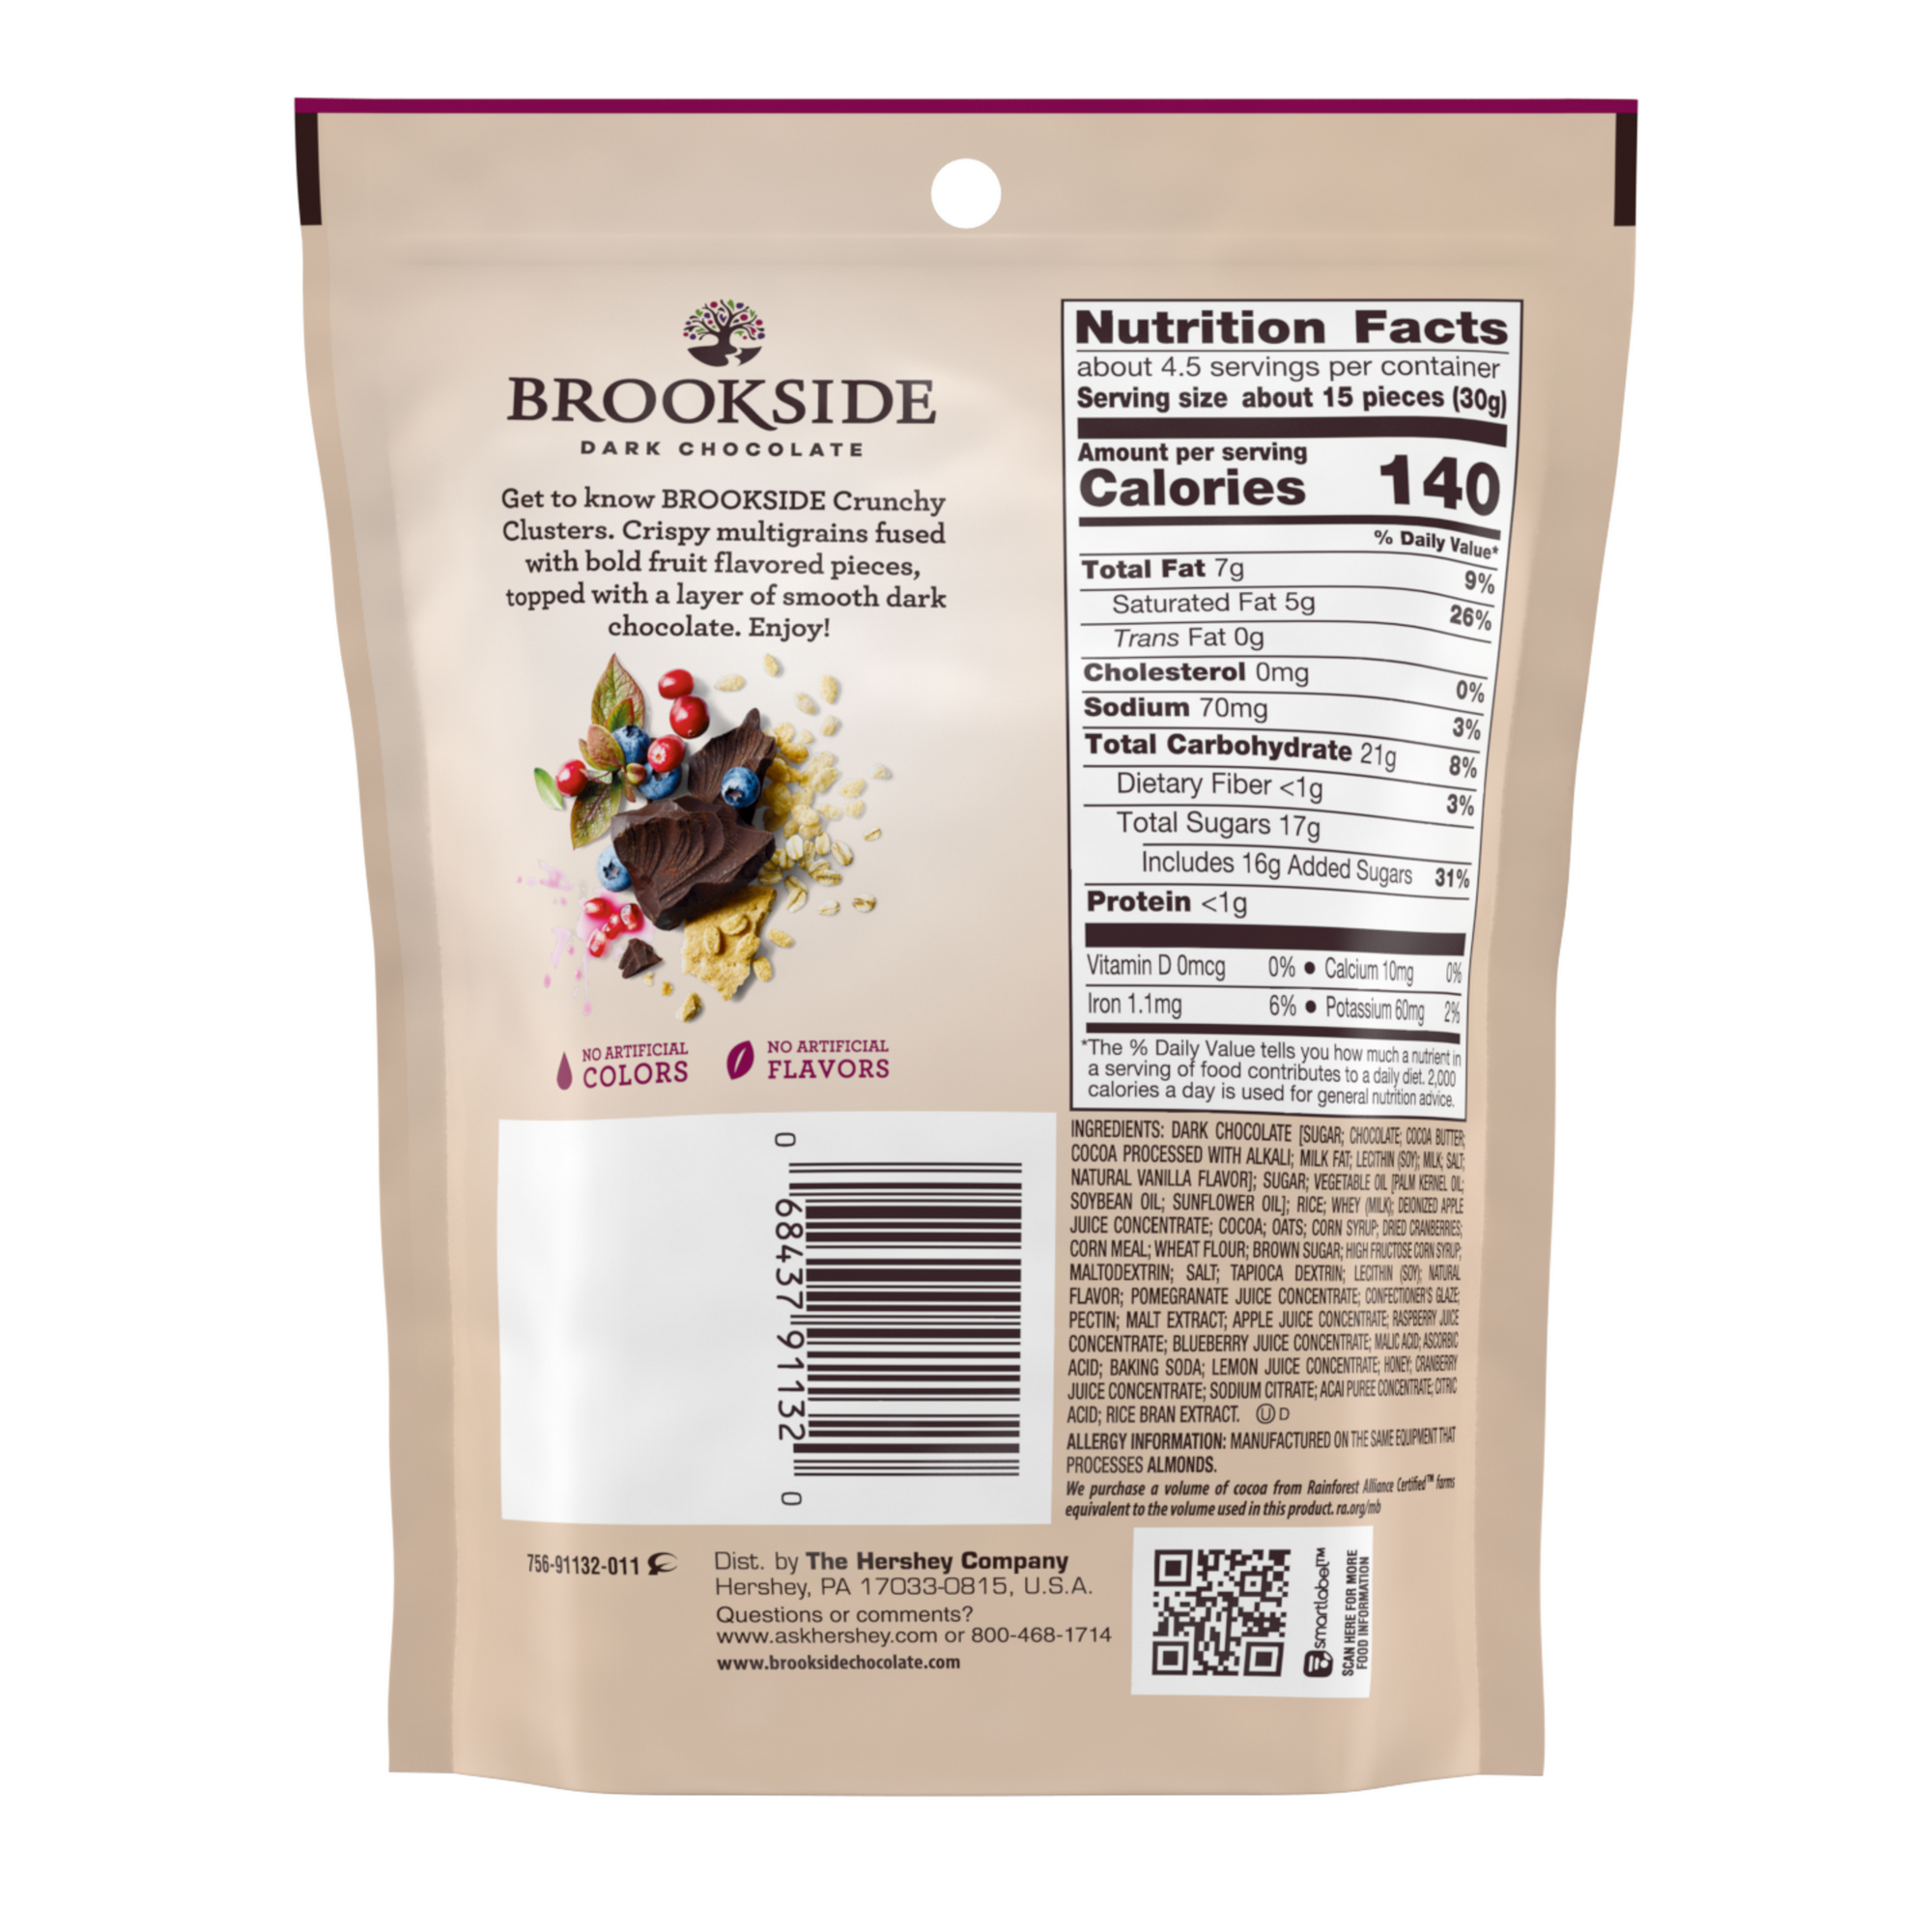 brookside crunchy clusters